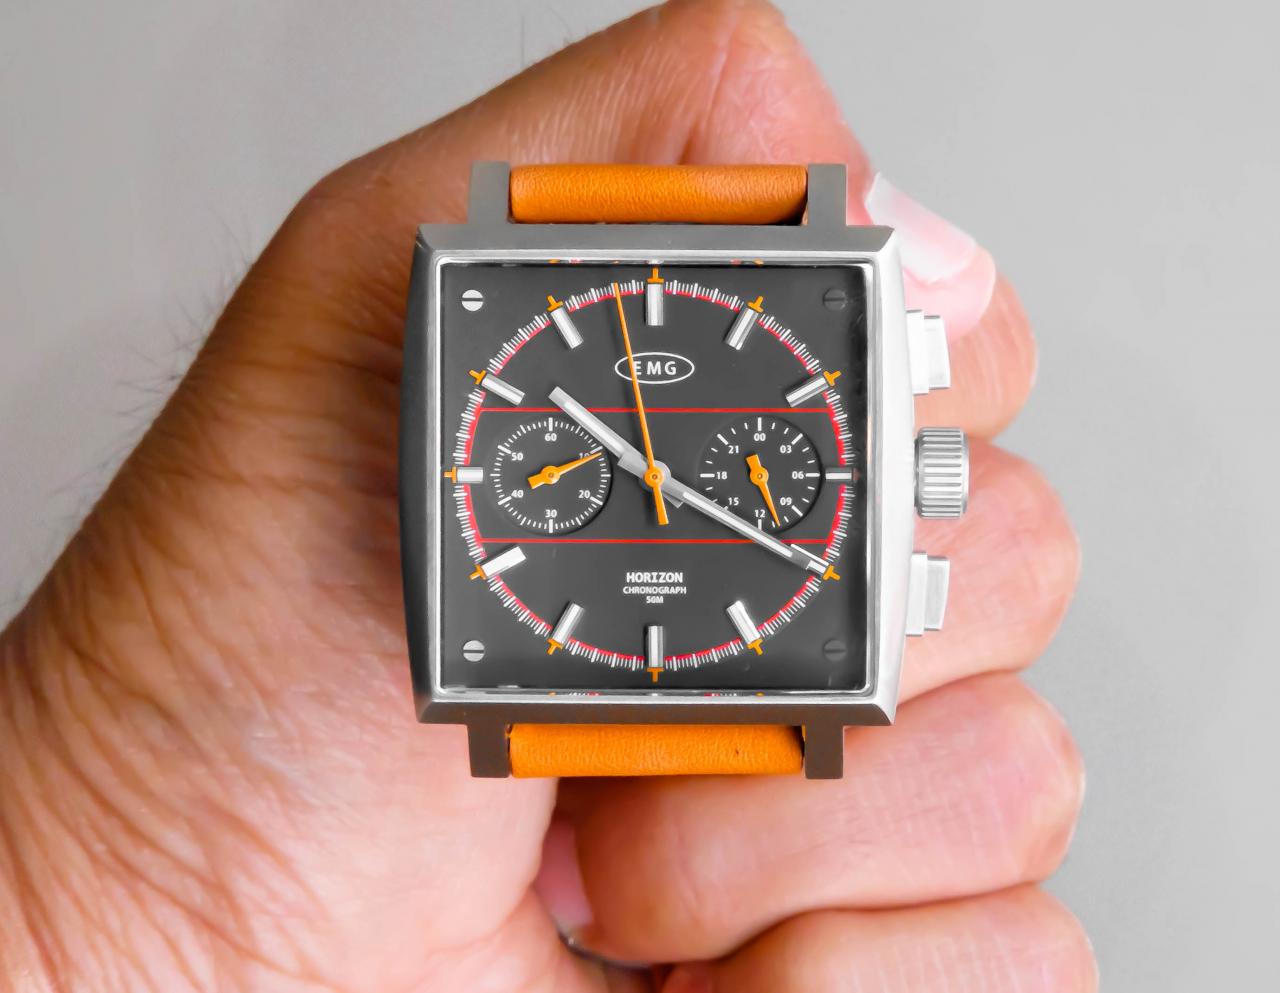 Horizon chronograph emg dial watches review